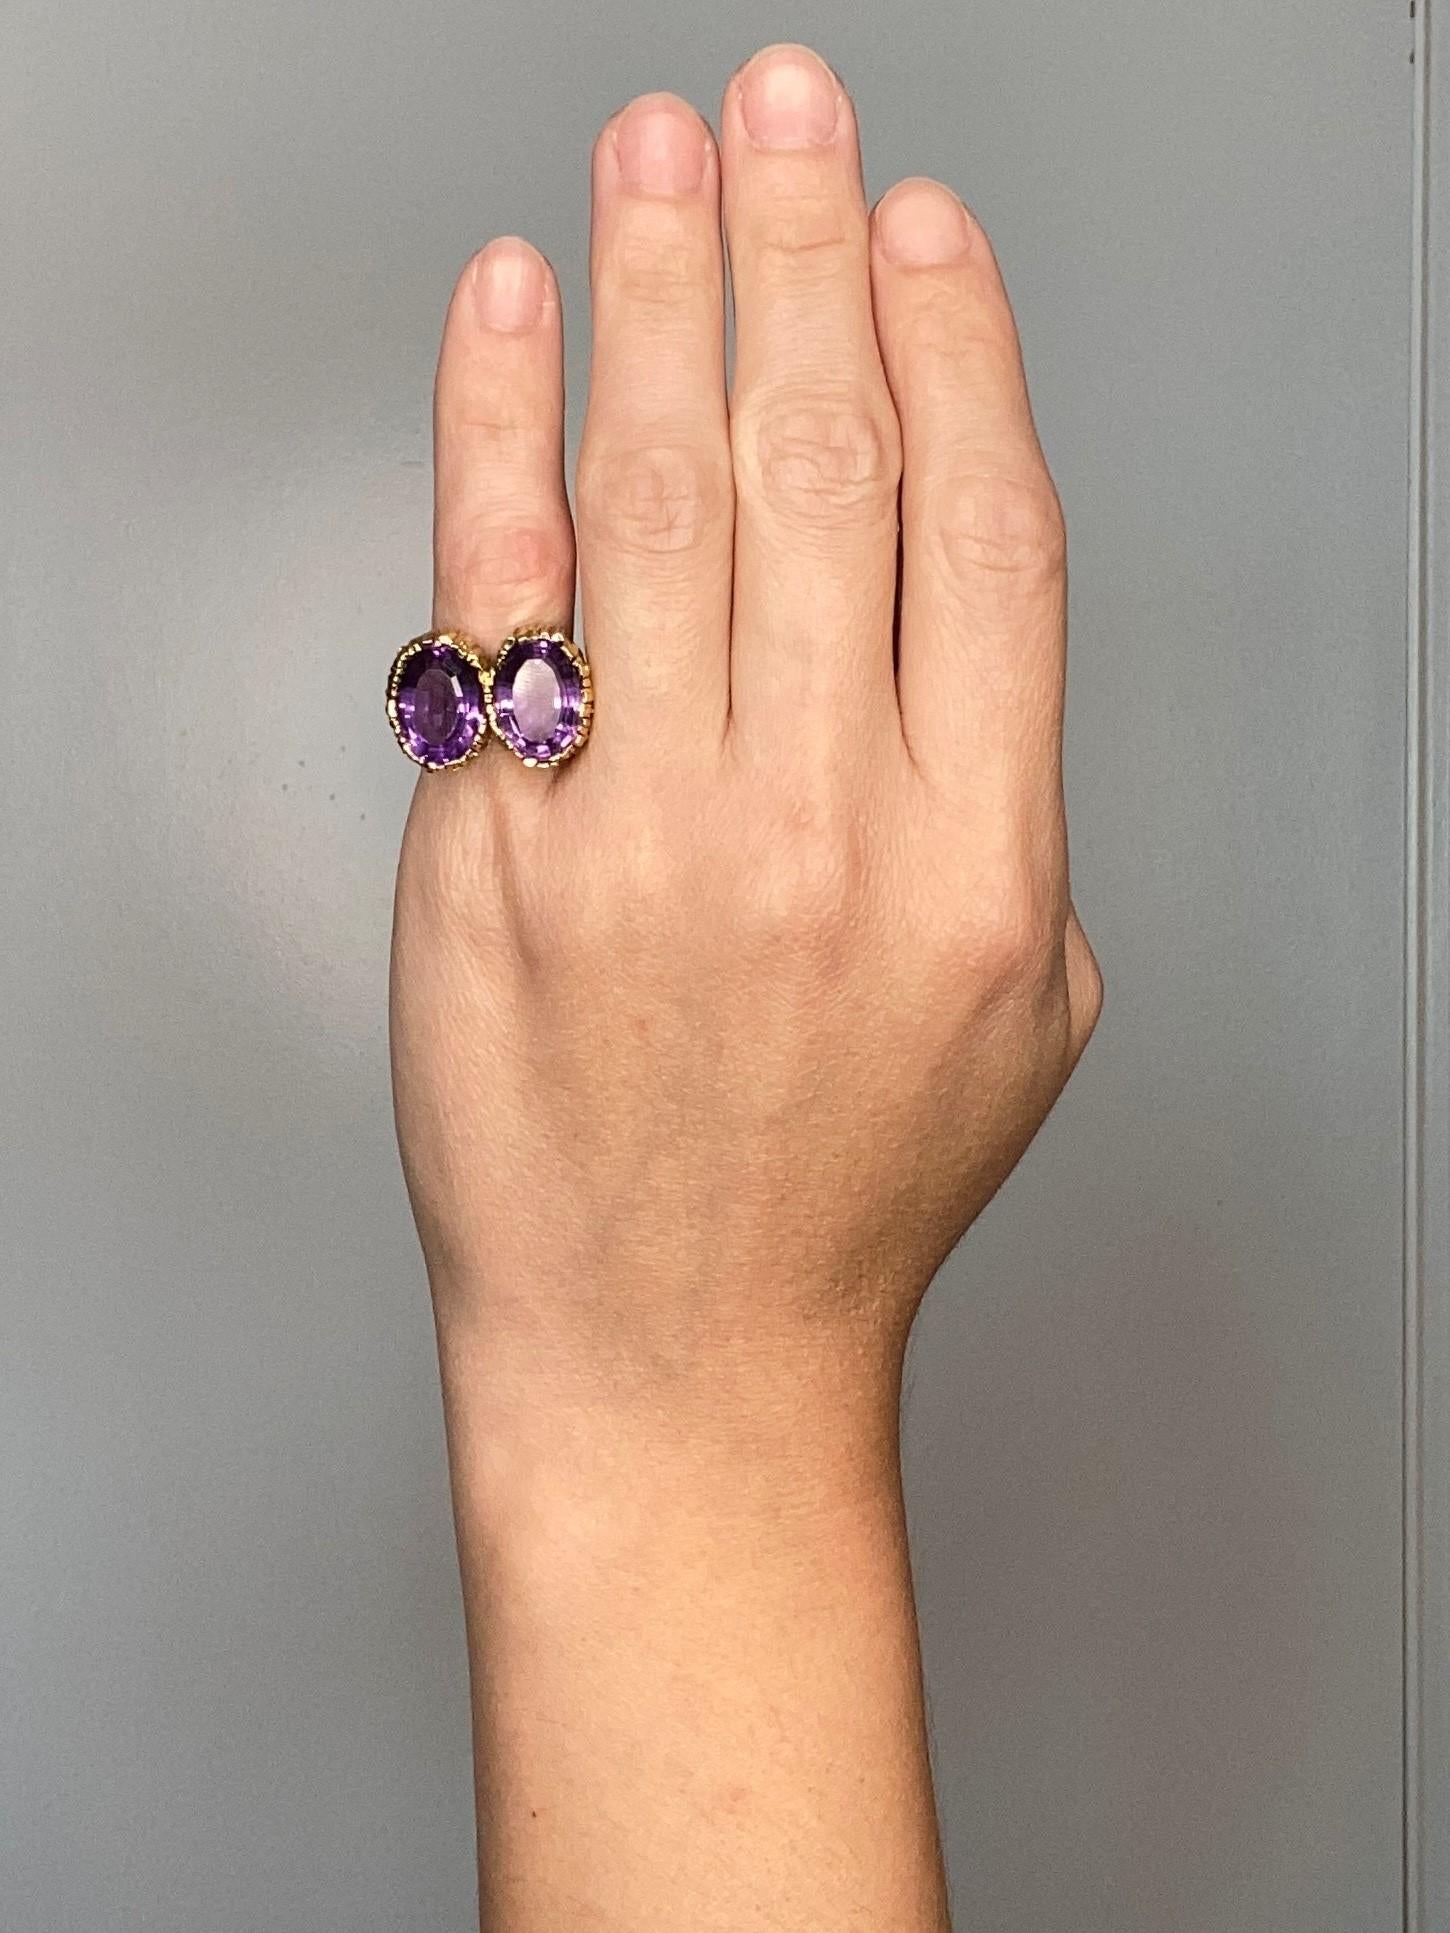 Women's or Men's Tiffany Co. Andrew Grima 1972 London Cocktail Ring 18Kt with 16.45 Cts Amethyst